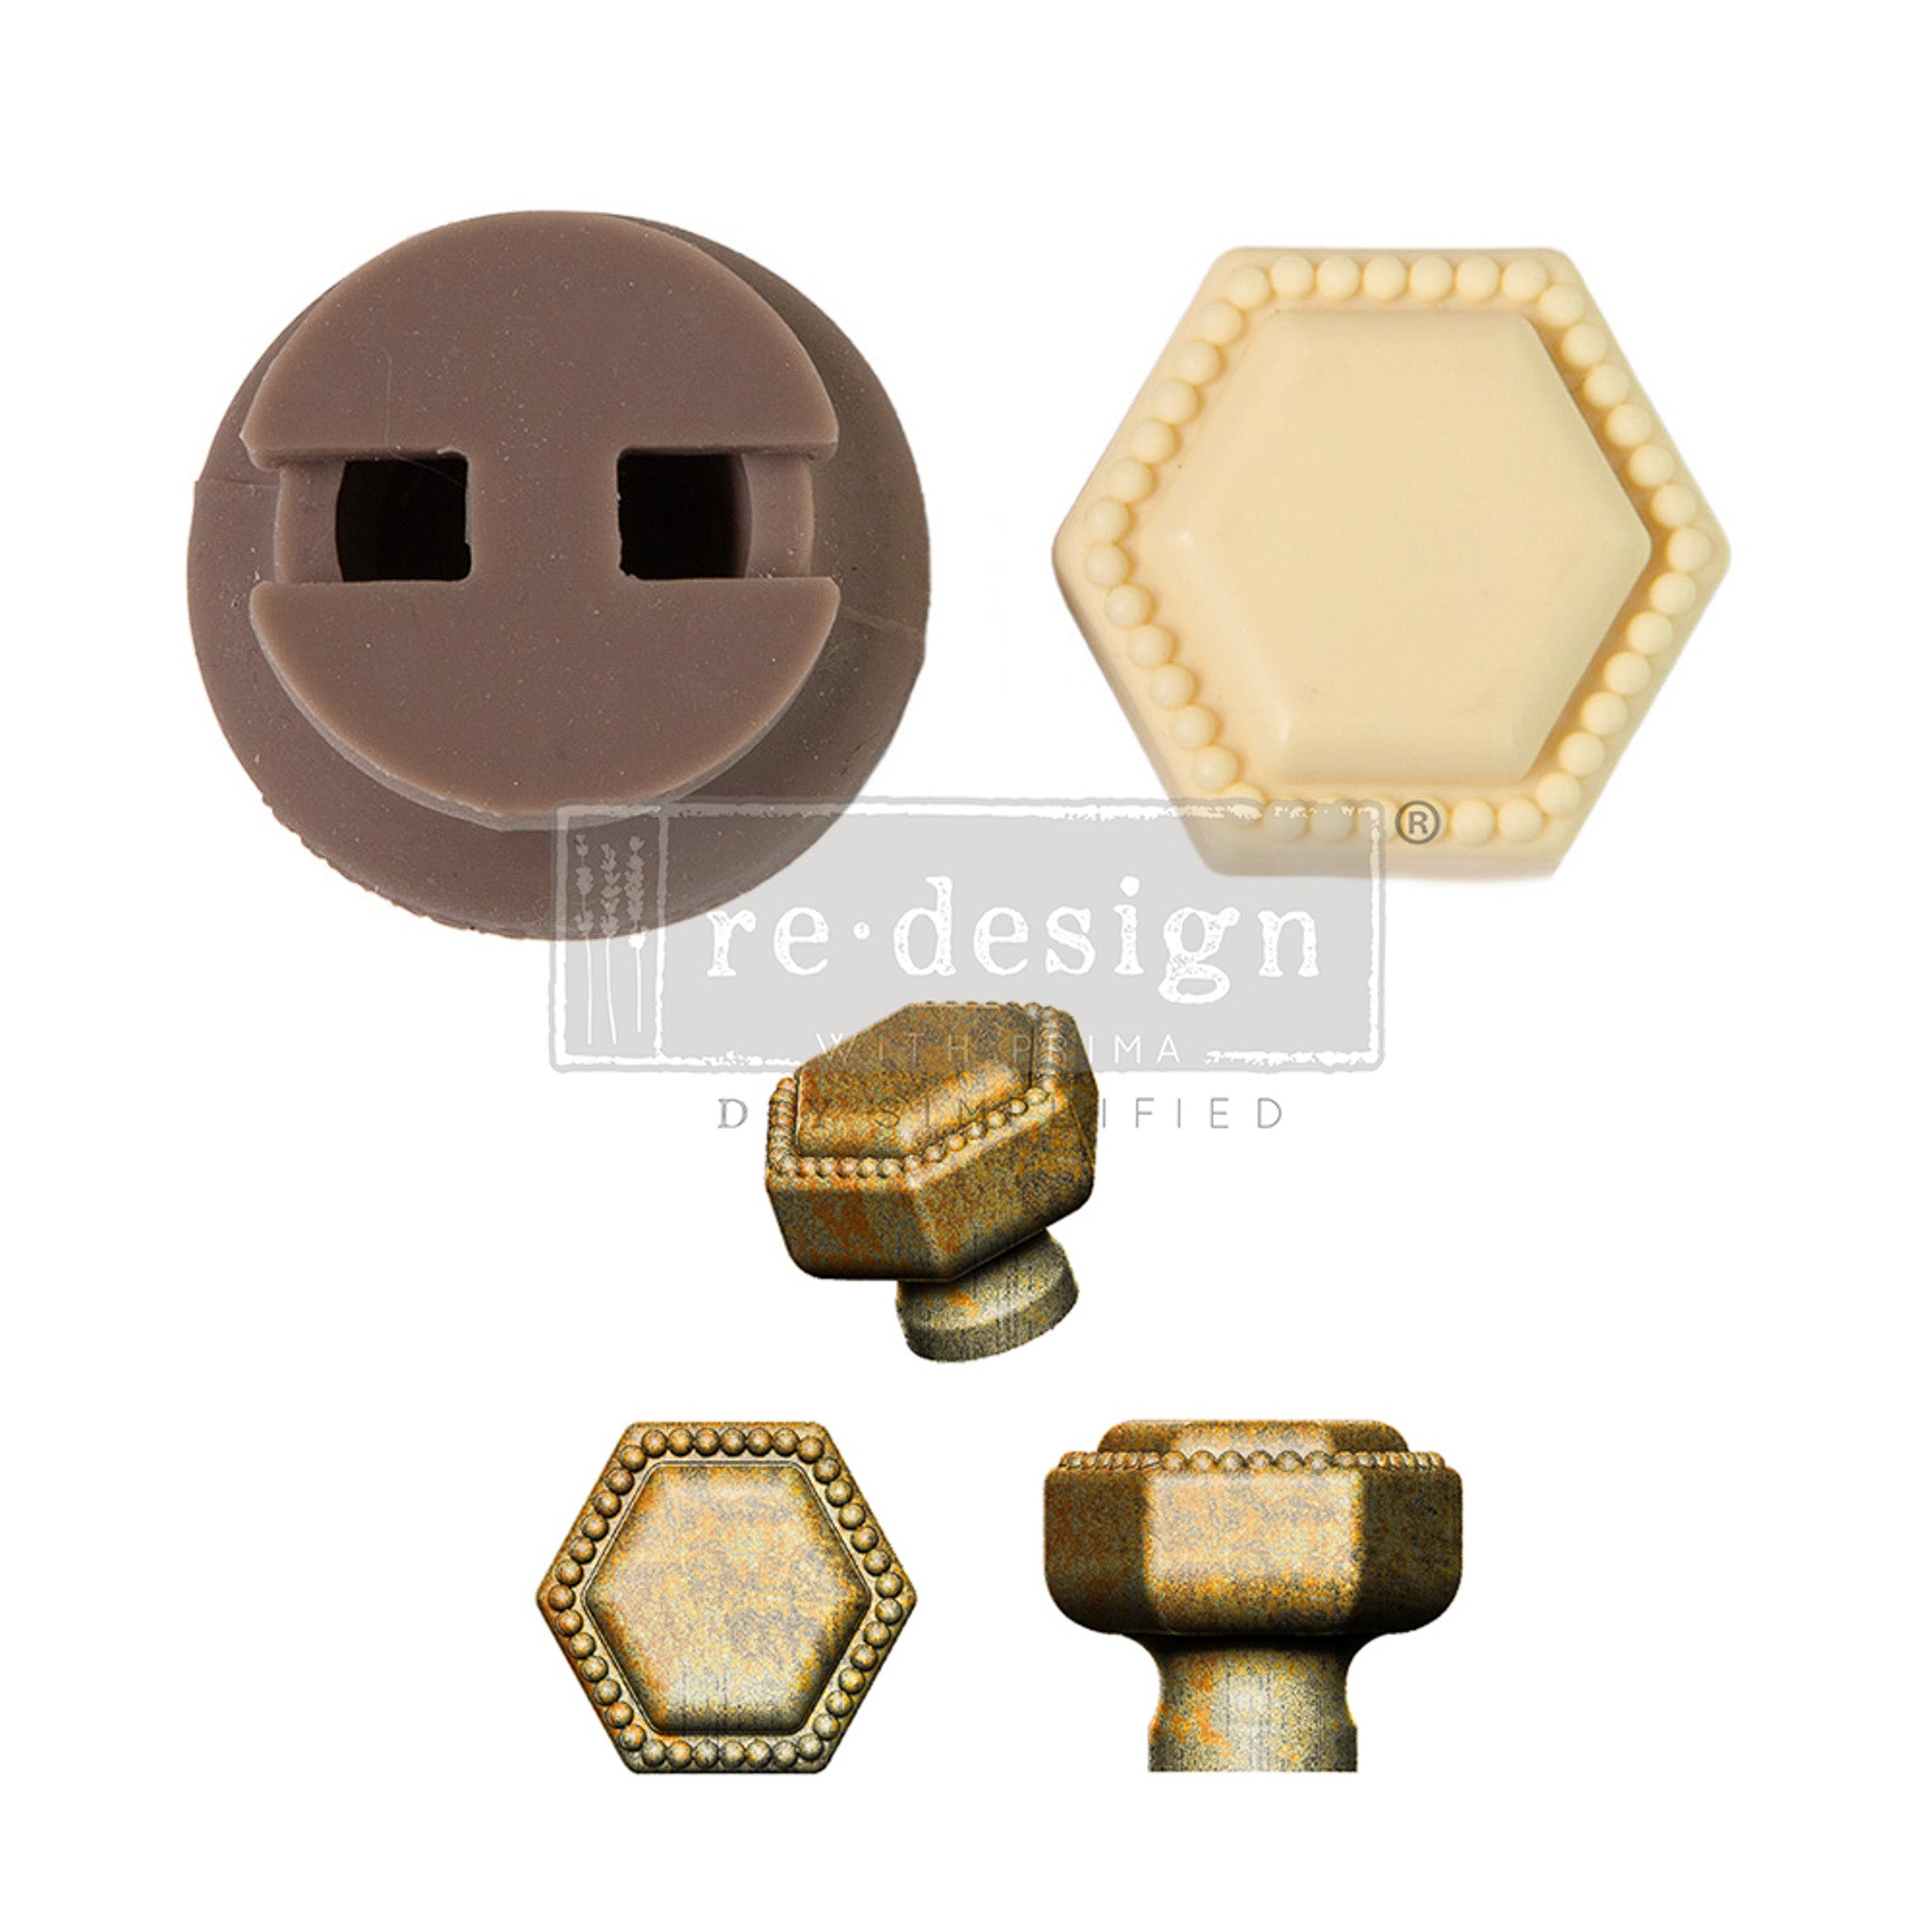 A brown silicone mold, cream-colored resin casting, and 3 views of gold-colored castings of a hexagon drawer knob with a pearl border are against a white background.